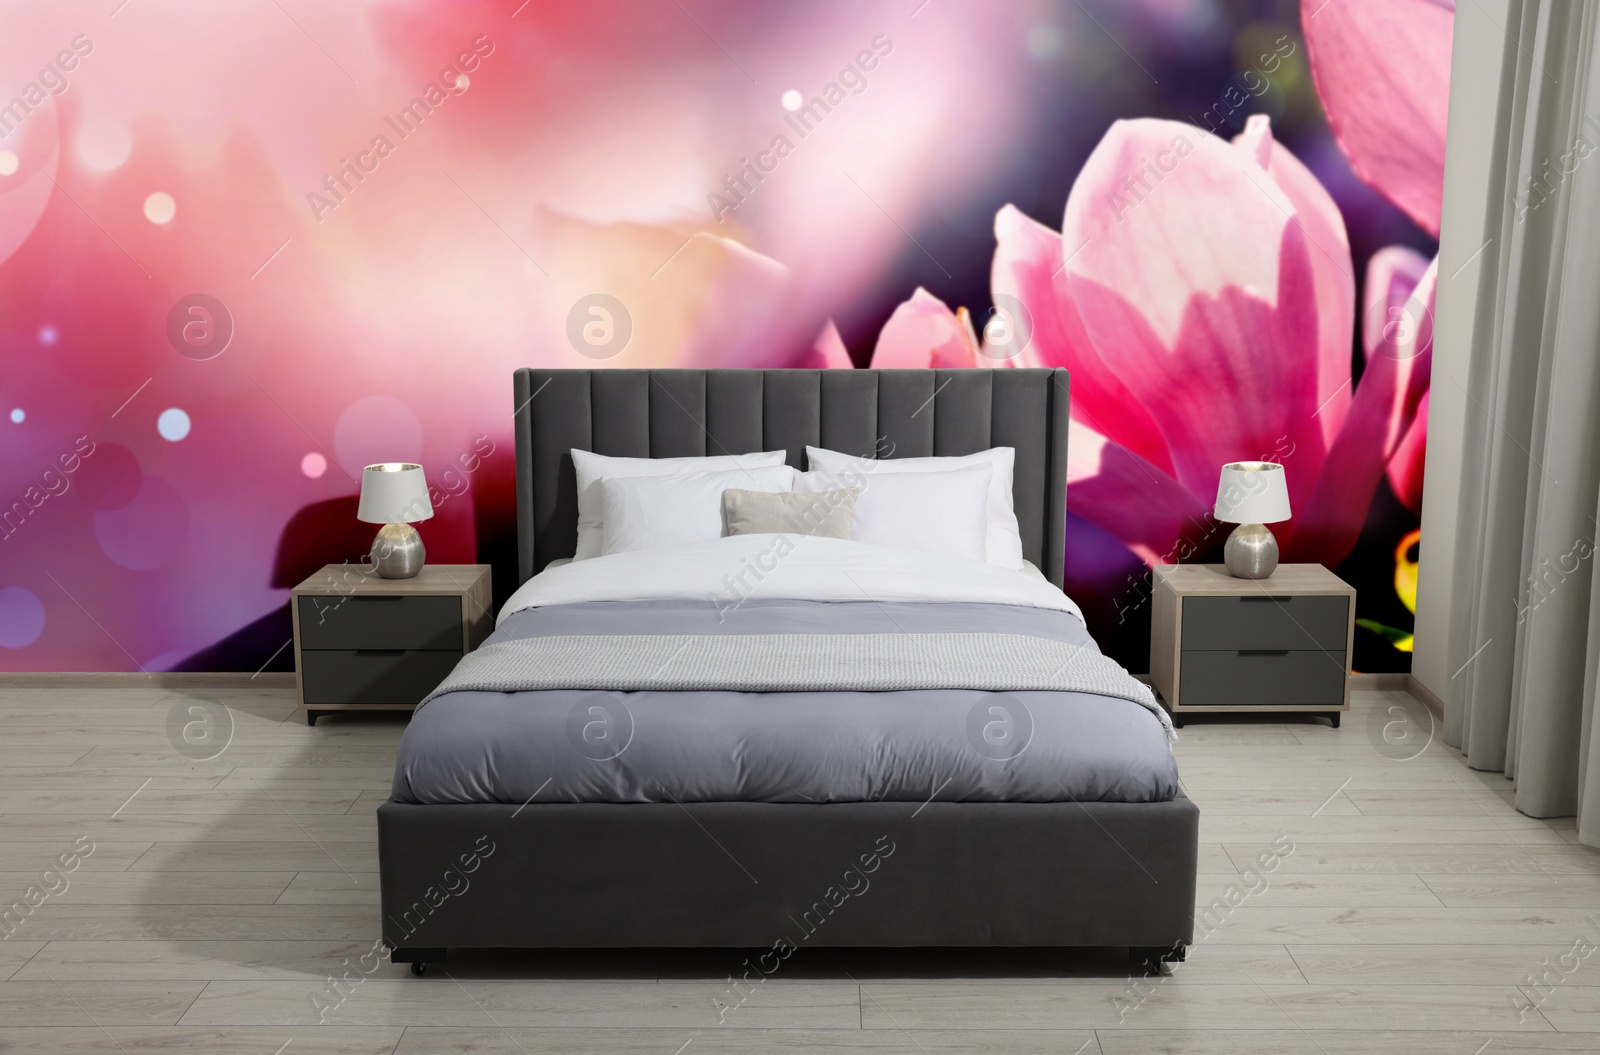 Image of Stylish bedroom interior with furniture and beautiful floral wallpapers